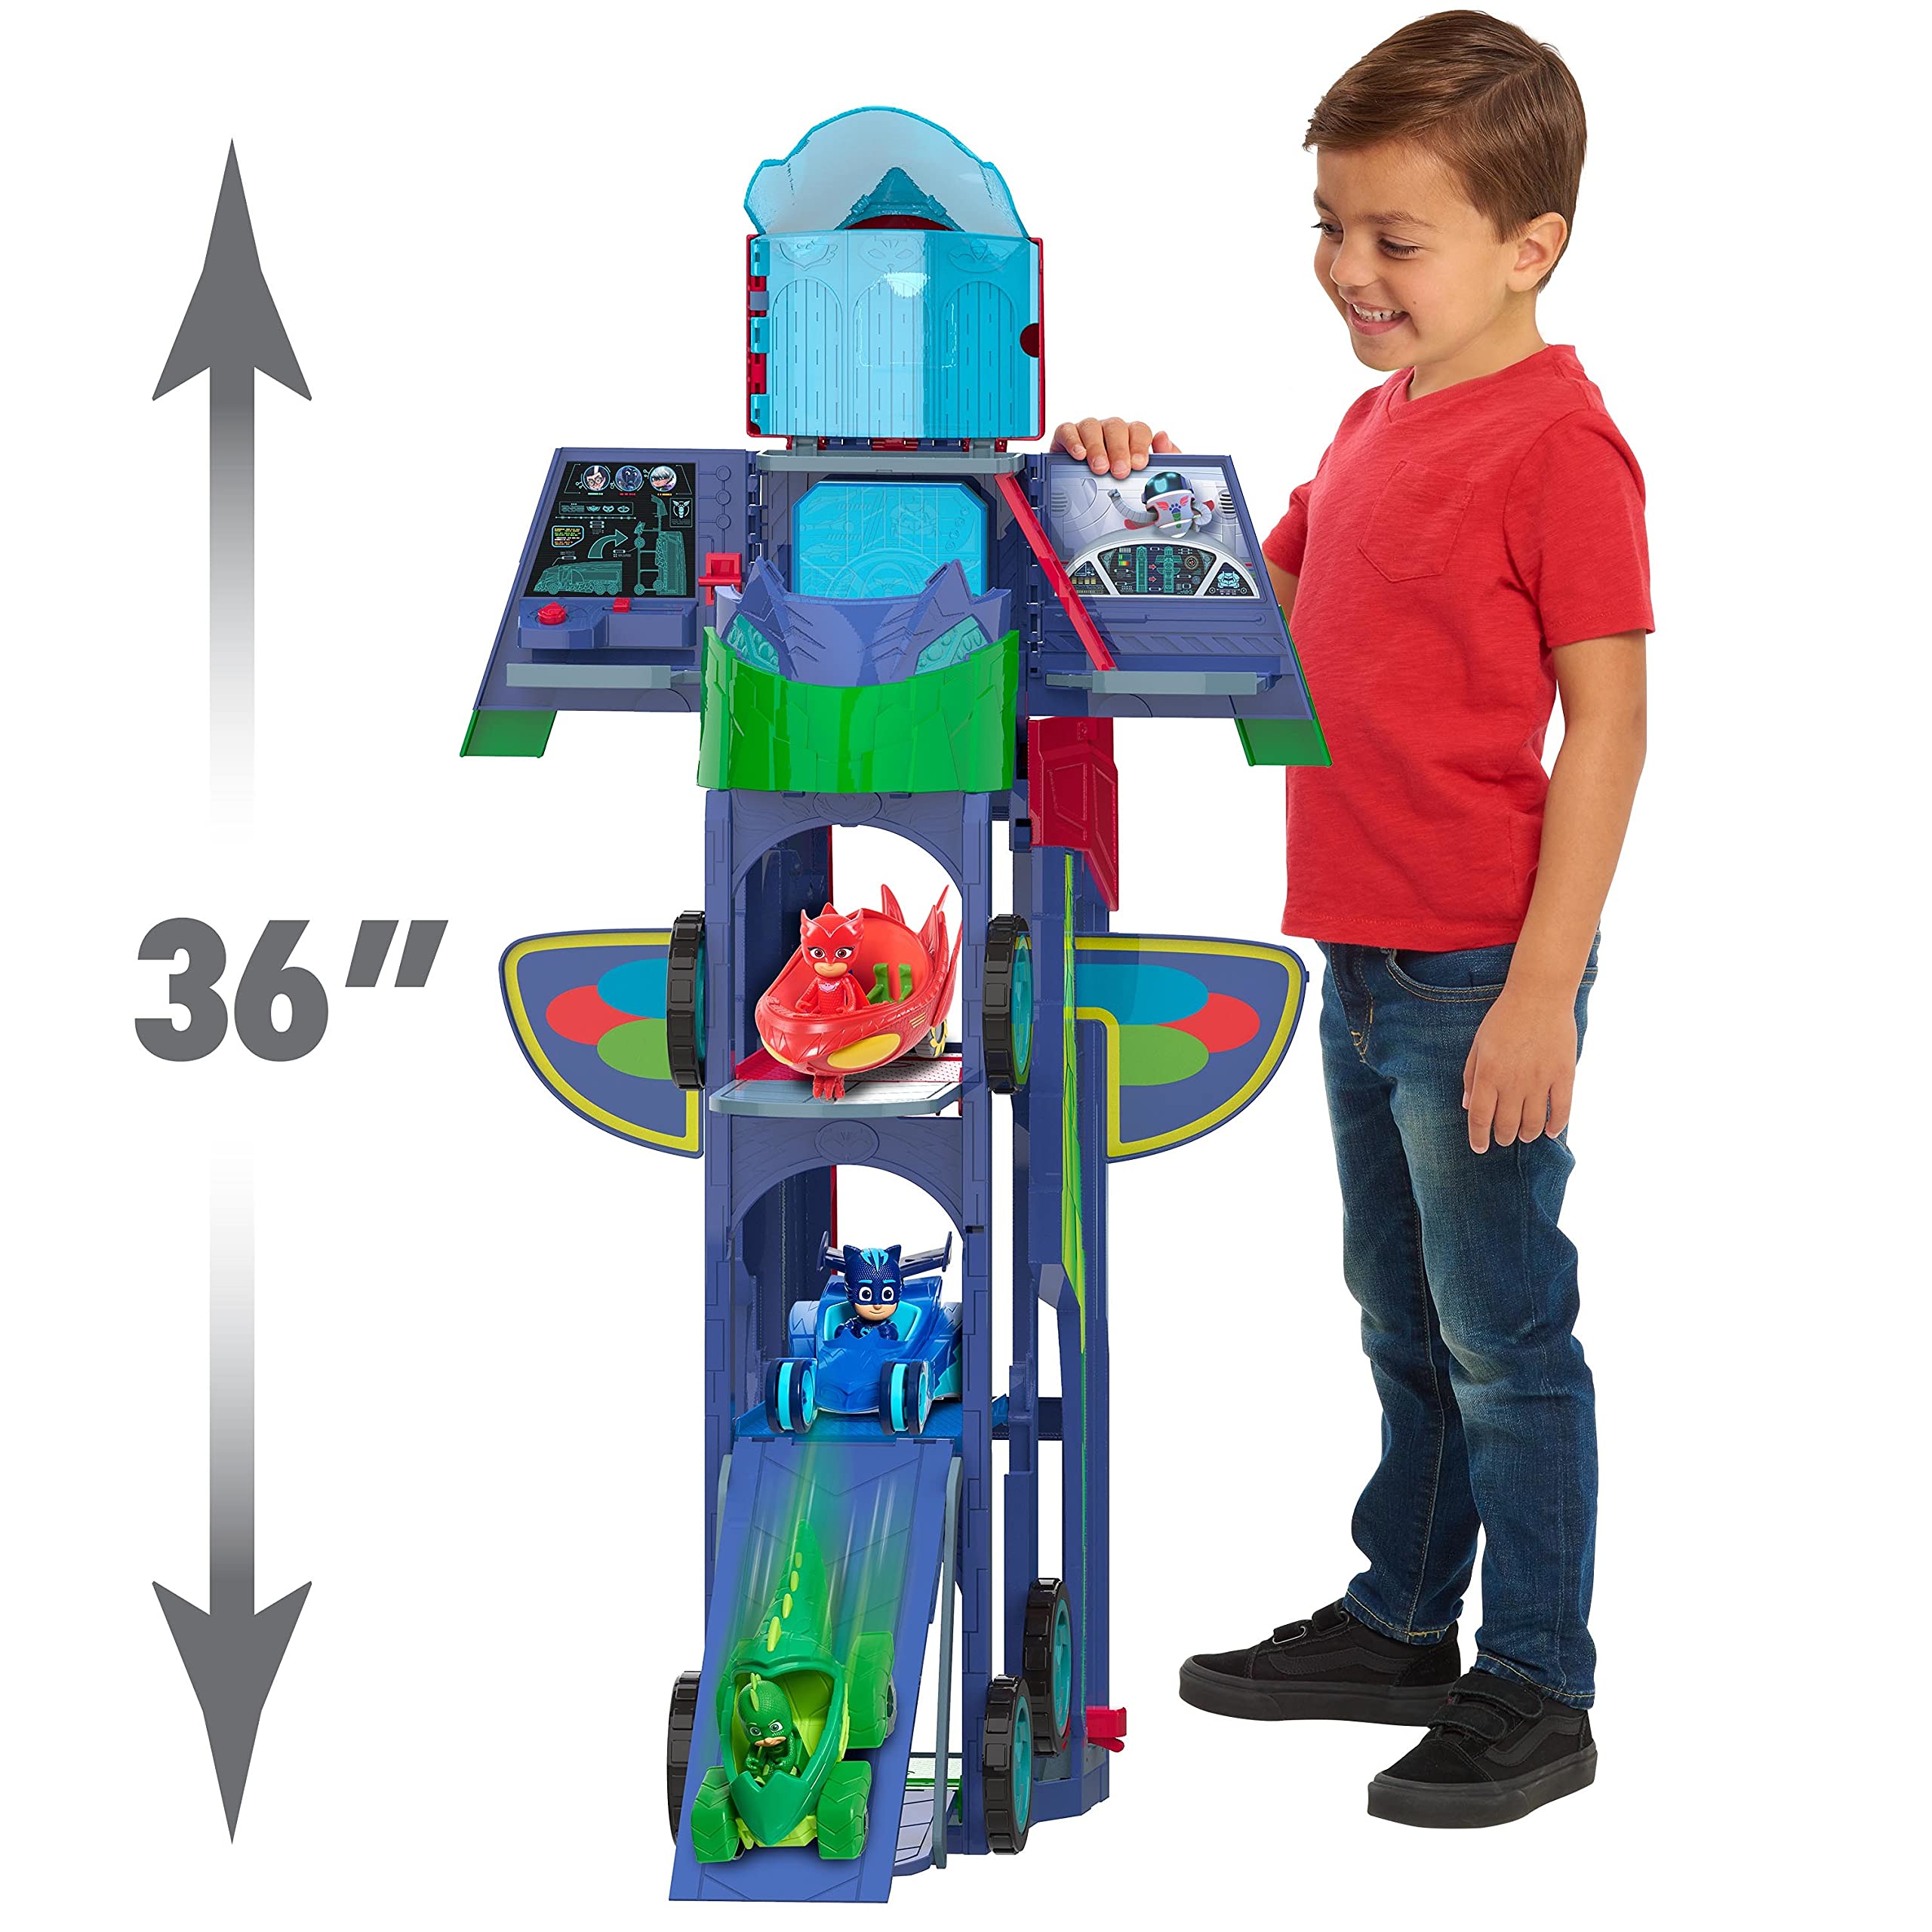 PJ Masks Transforming 2 in 1 Mobile HQ, by Just Play